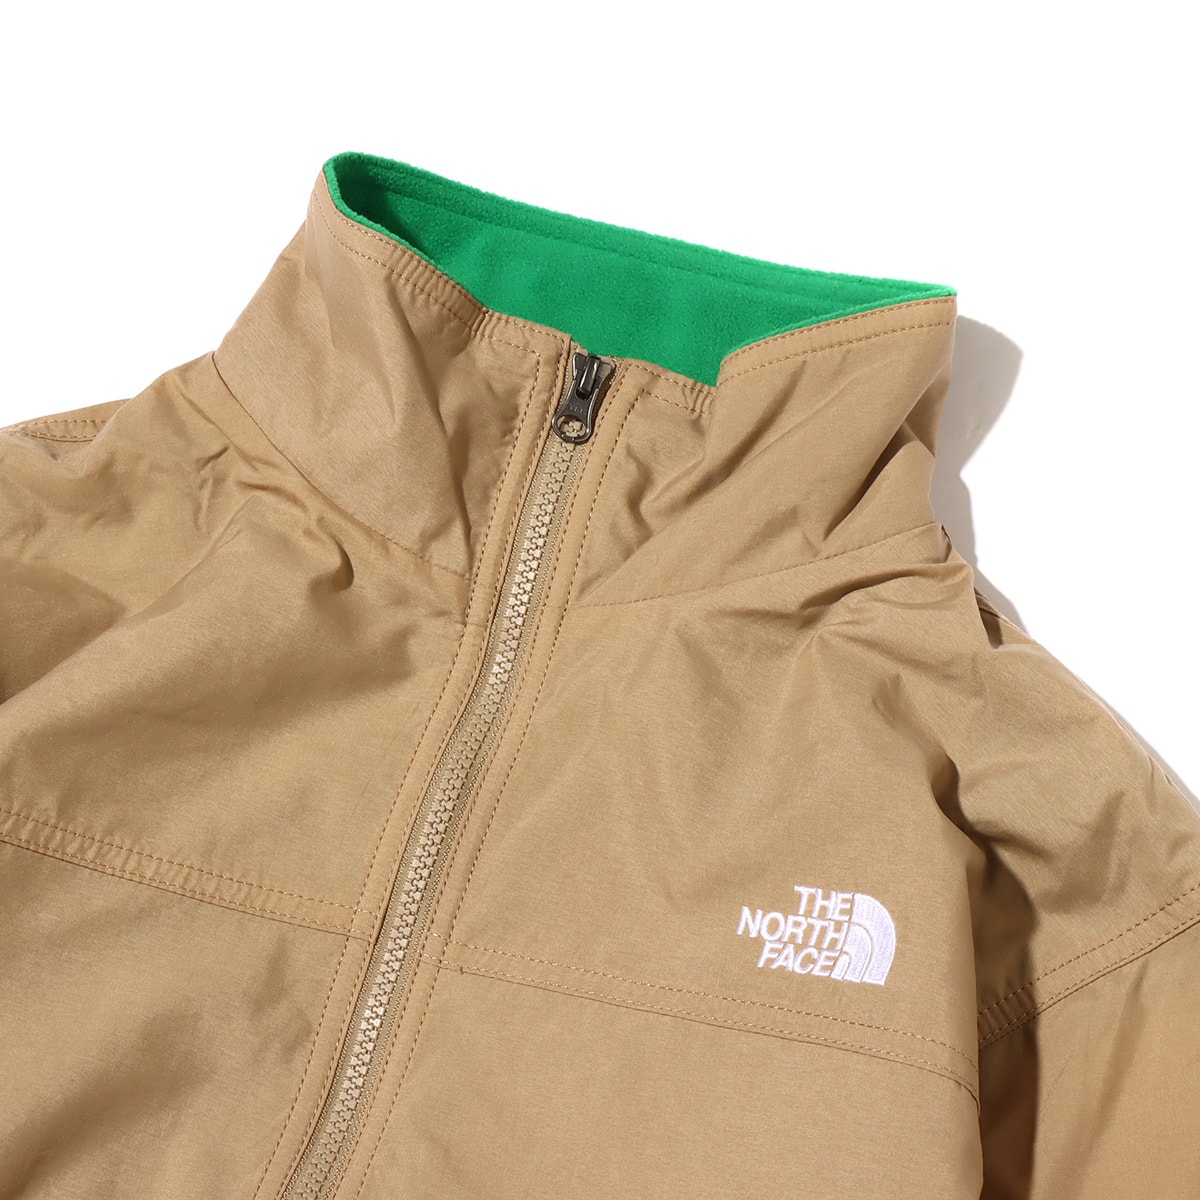 THE NORTH FACE CAMP NOMAD JACKET ケルプタン×アマゾングリーン 22FW-I